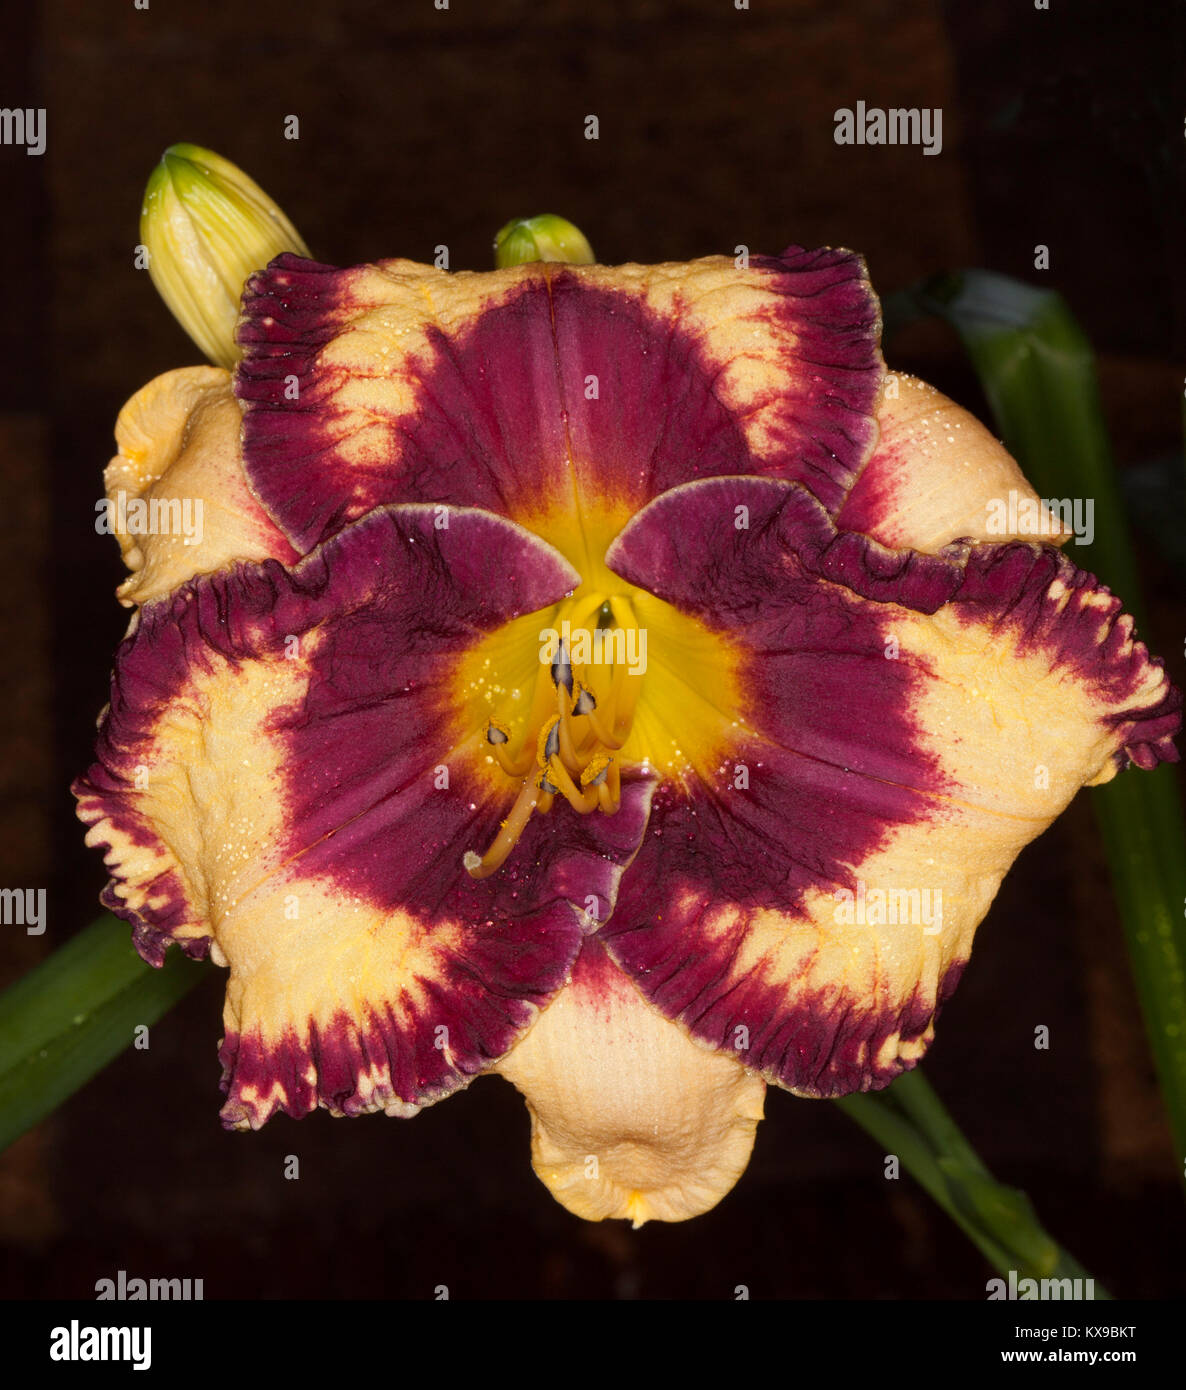 Spectacular flower of daylily cultivar Hemerocallis 'Open My Eyes', with apricot and dark red petals and yellow throat on dark background Stock Photo